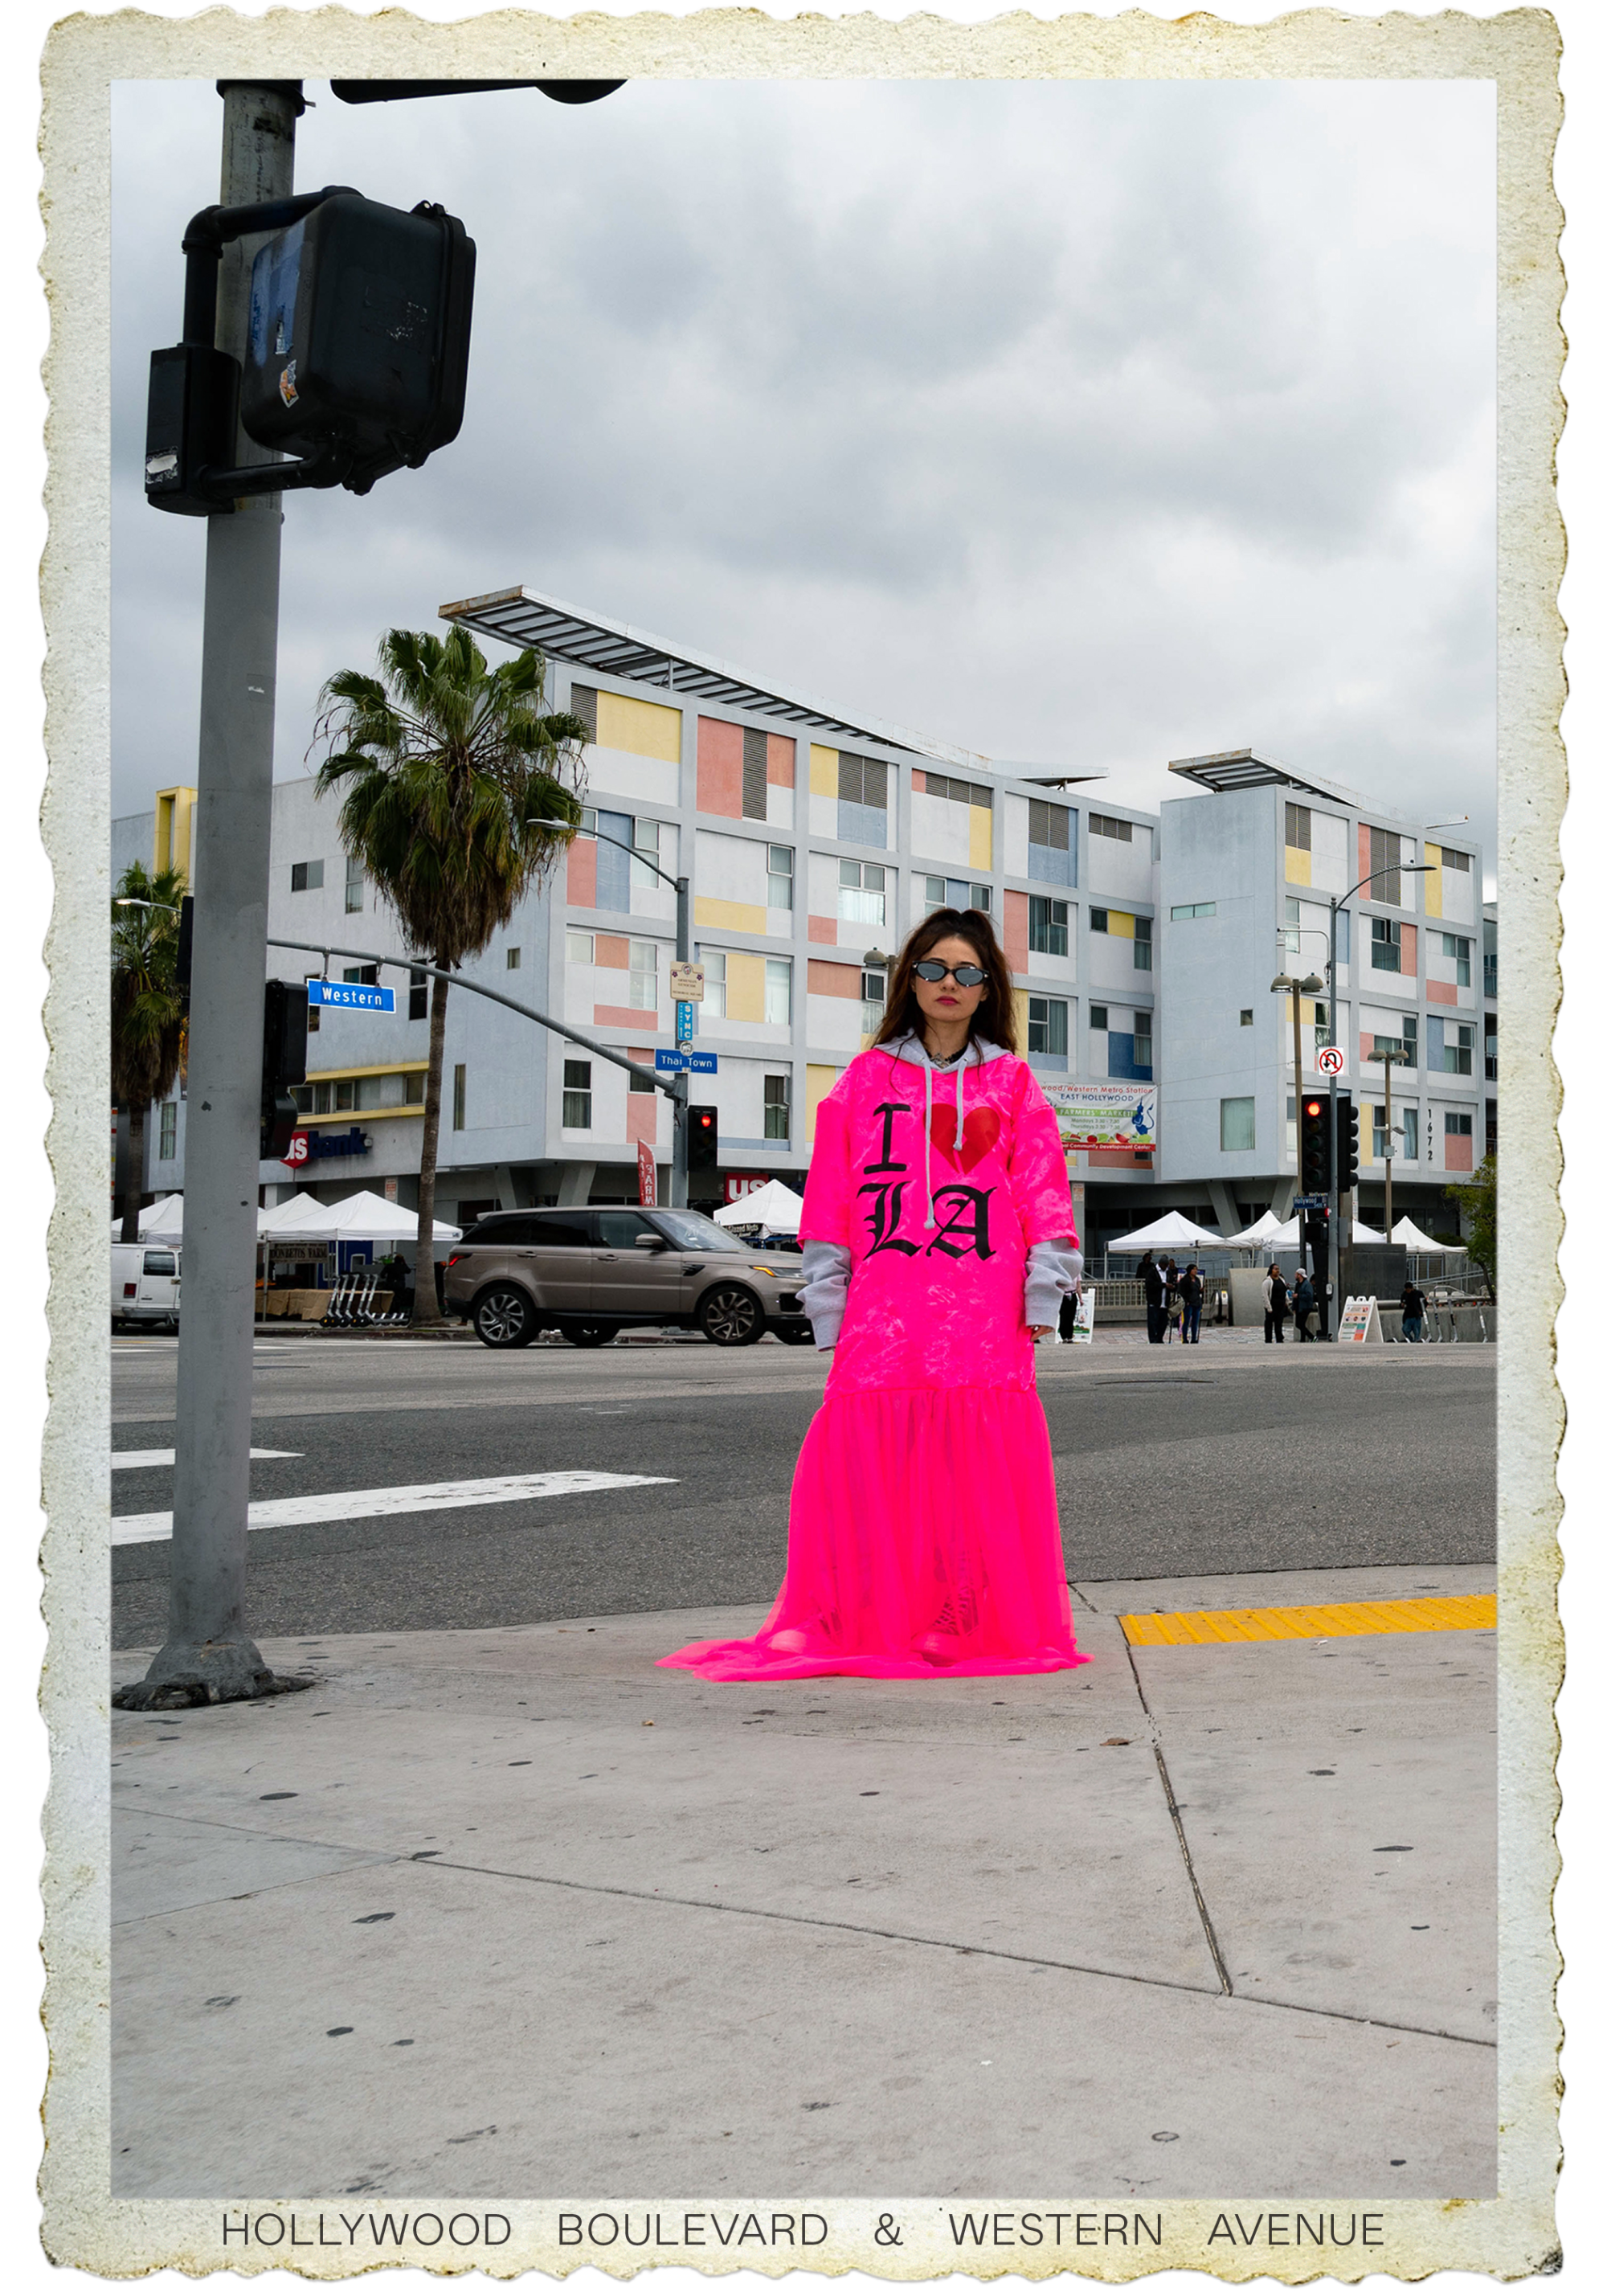 Vally Campbell wears a pink dress at intersection of Hollywood and Western.